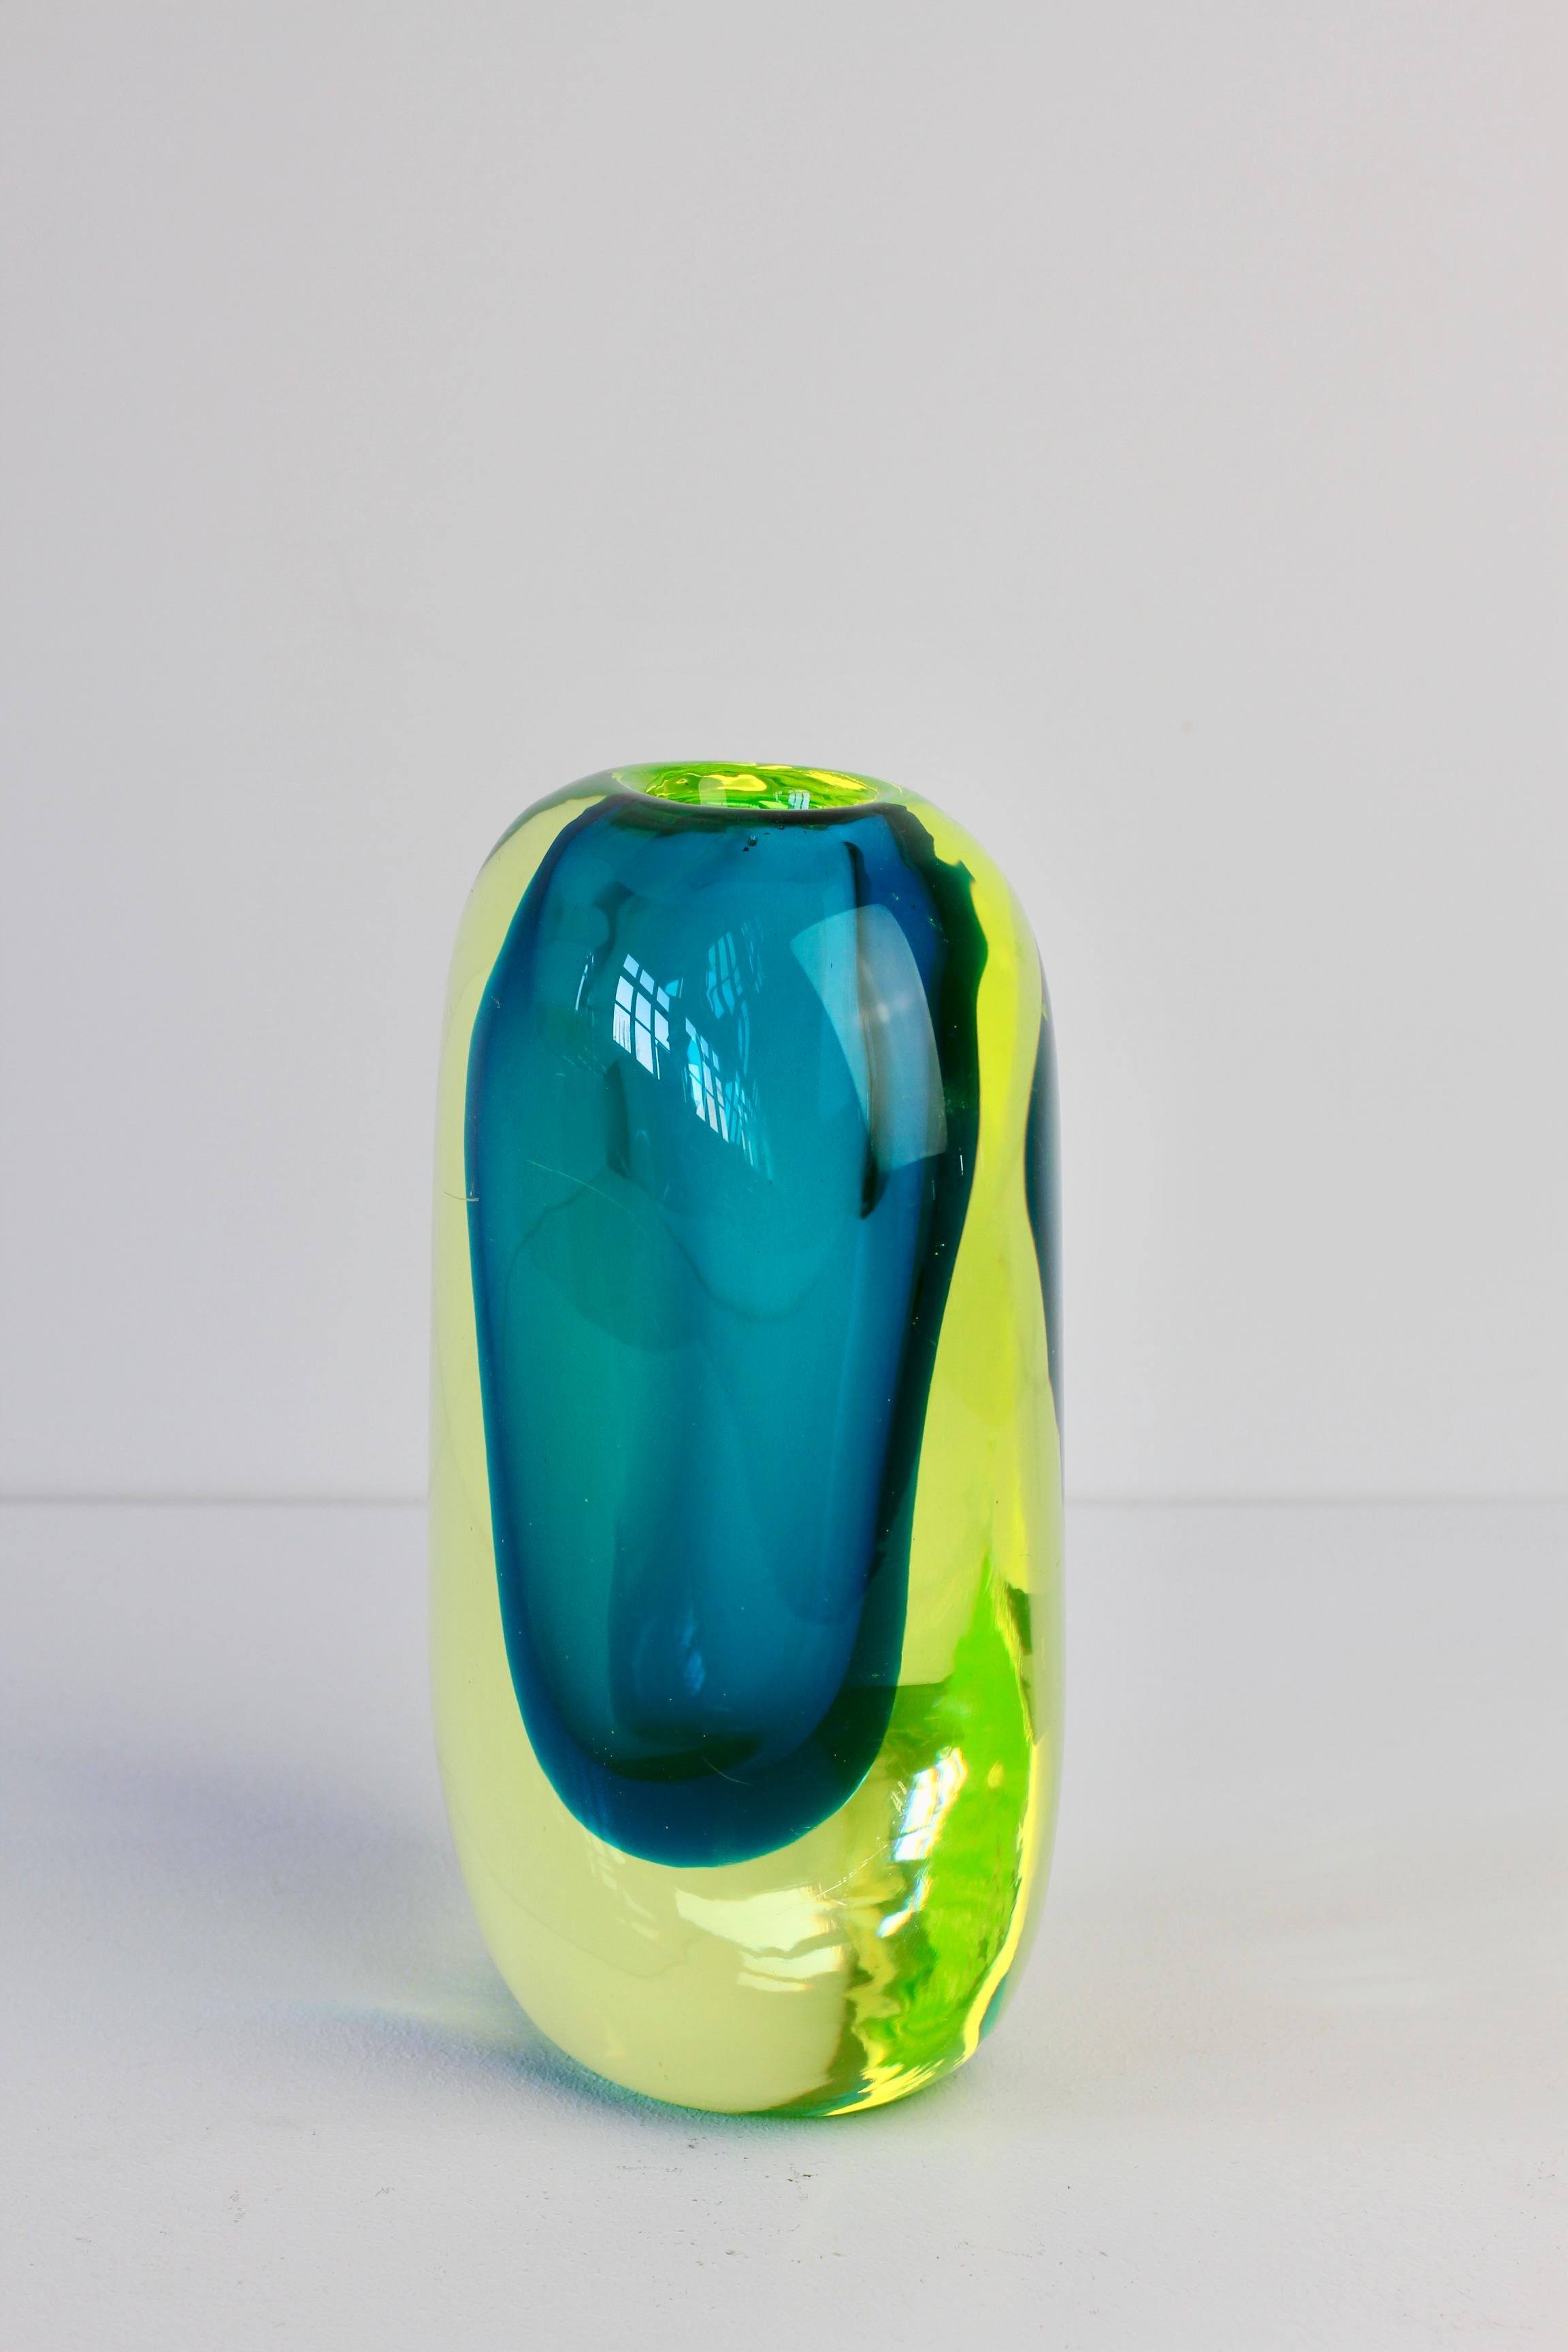 Blown Glass Yellow & Blue Italian Murano Sommerso Glass Vase c. 1970s Cenedese 'Attributed'